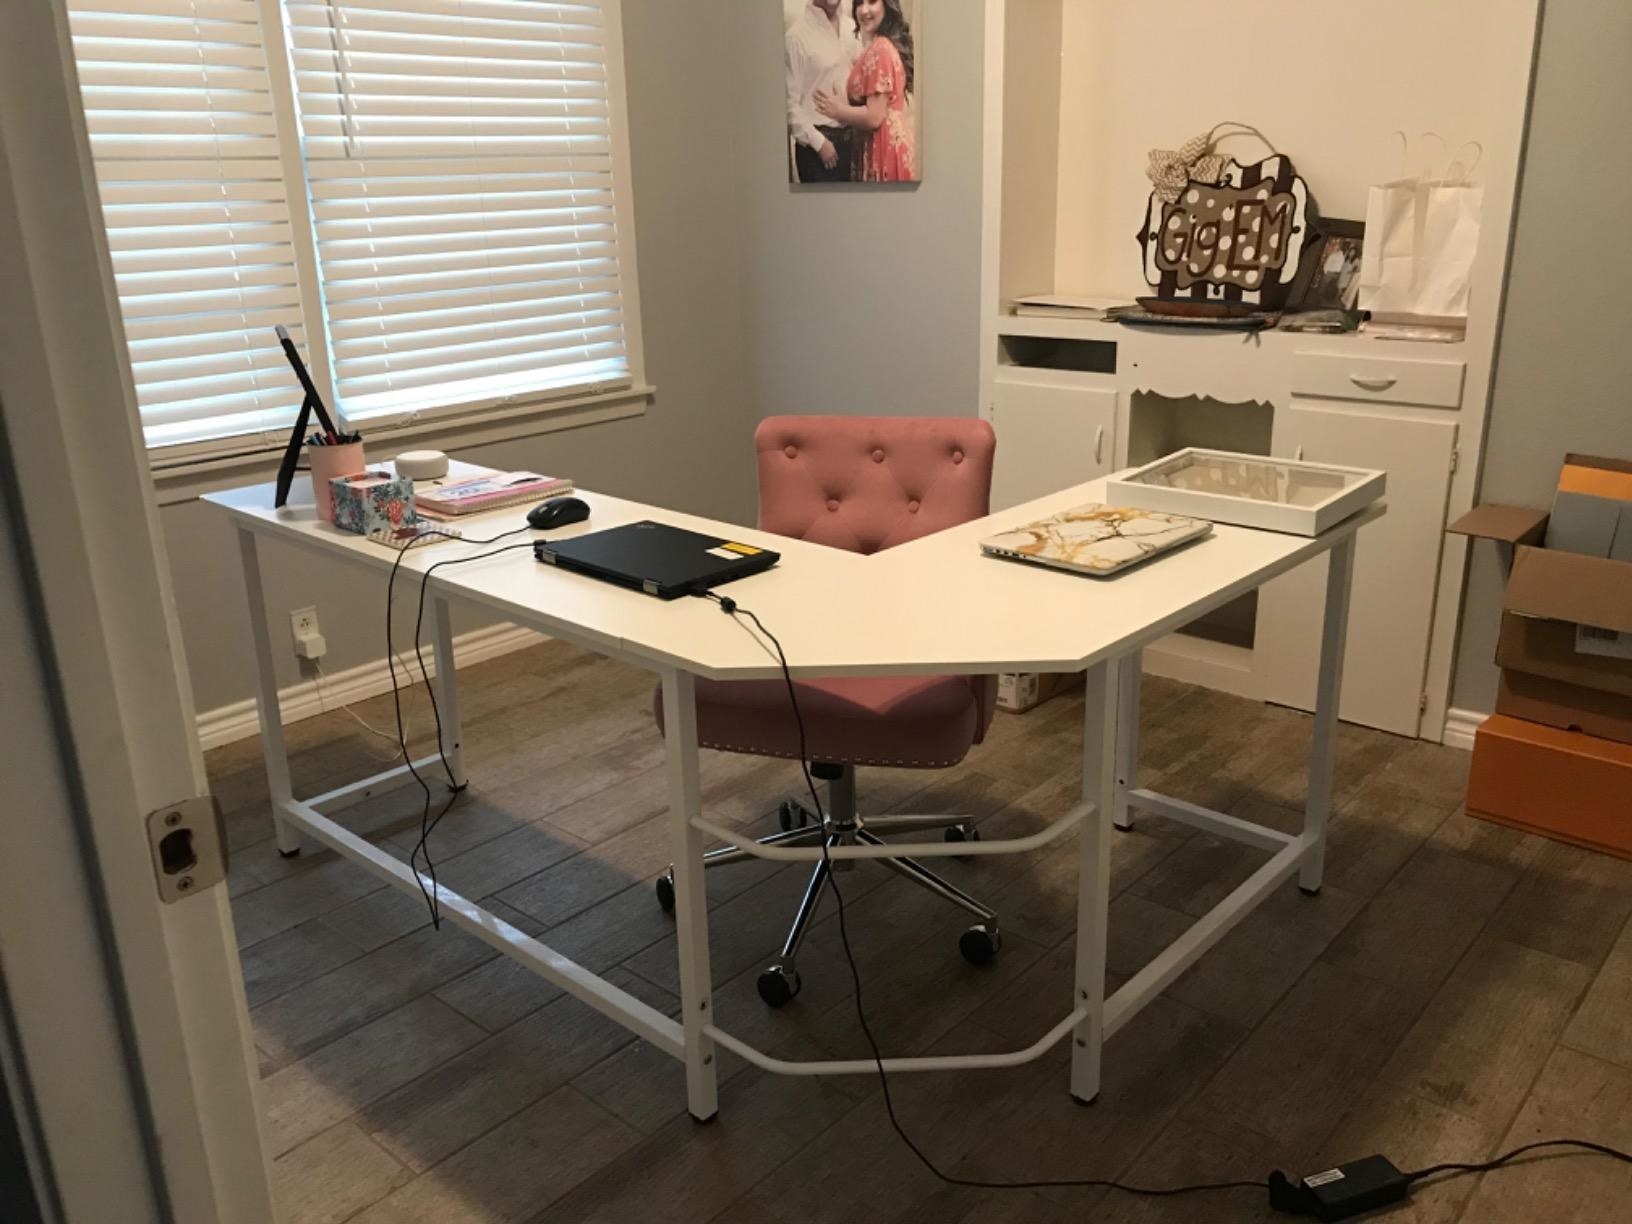 White L-shaped desk in front of pink office chair with laptop and office supplies spread out